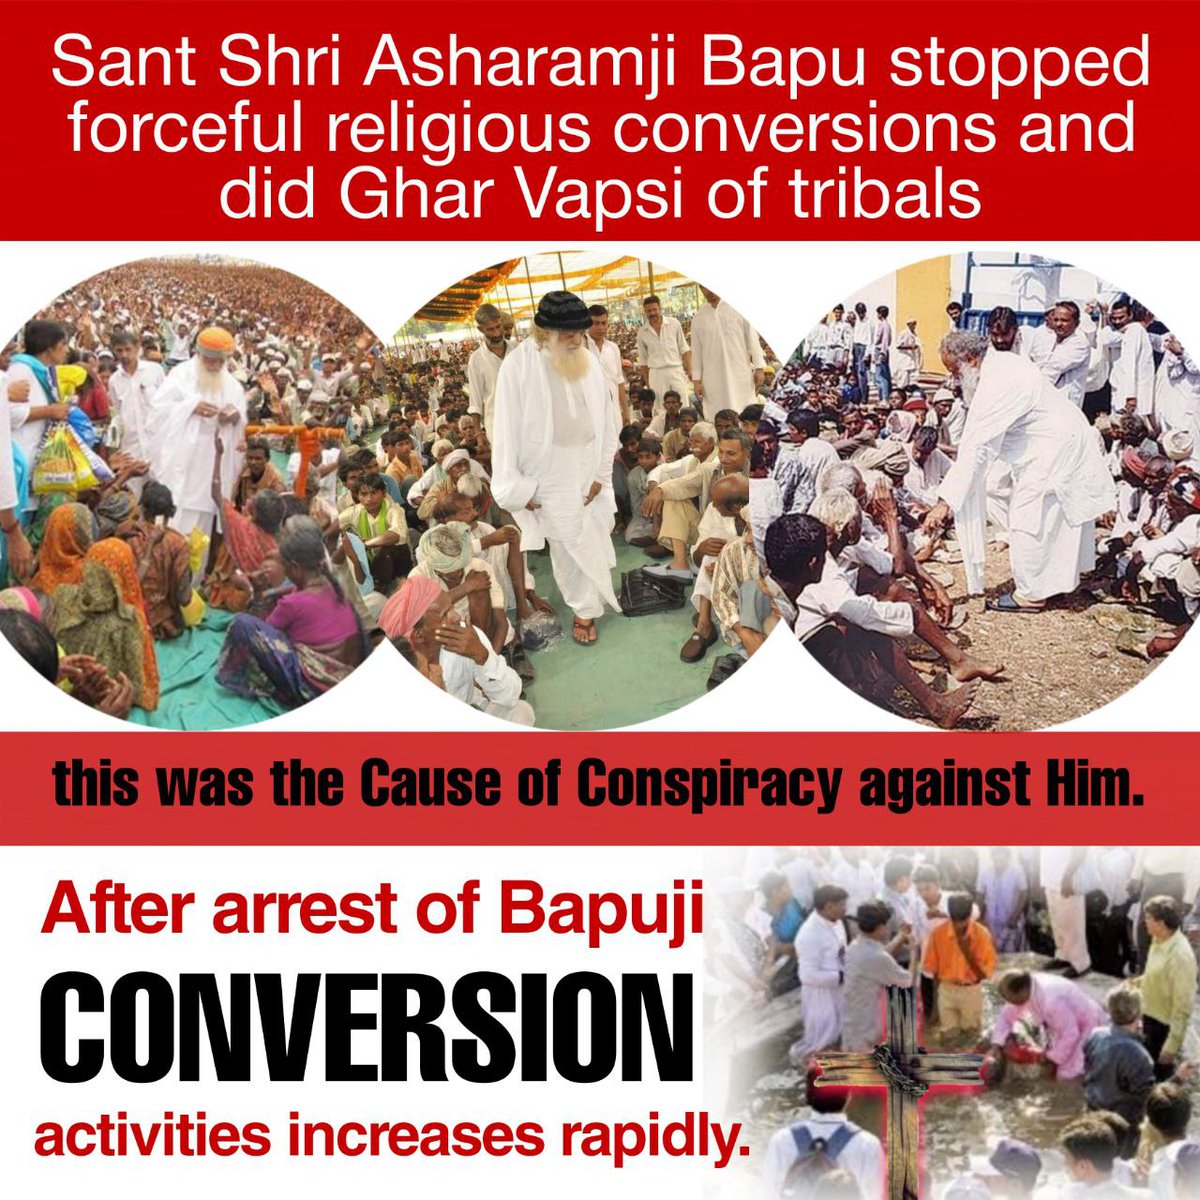 Where Politicians failed He reached

#किसने_मुहिम_चलाई
Jab Sab Soye The
Tab Jaga Tha Ek Masiha

Conversion was taking place in the Remote regions due to lack of BASIC NEEDS.
Sant Shri Asharamji Bapu
did the service of providing food, clothes and houses, which leds to Ghar Wapsi